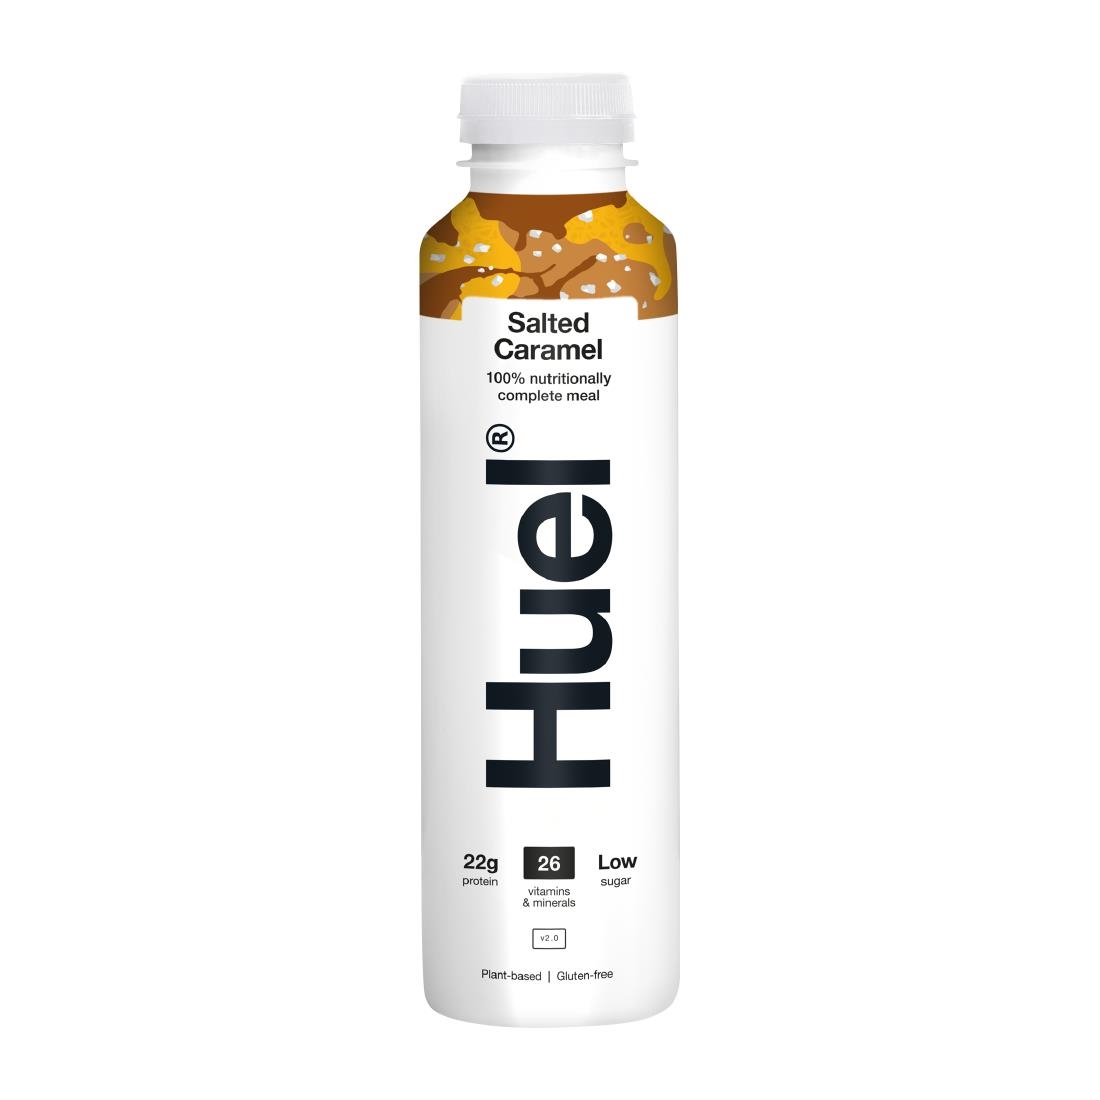 HUEL 100 Nutritionally Complete Meal Drink - Salted Caramel 500ml Pack of 8 (HS544)